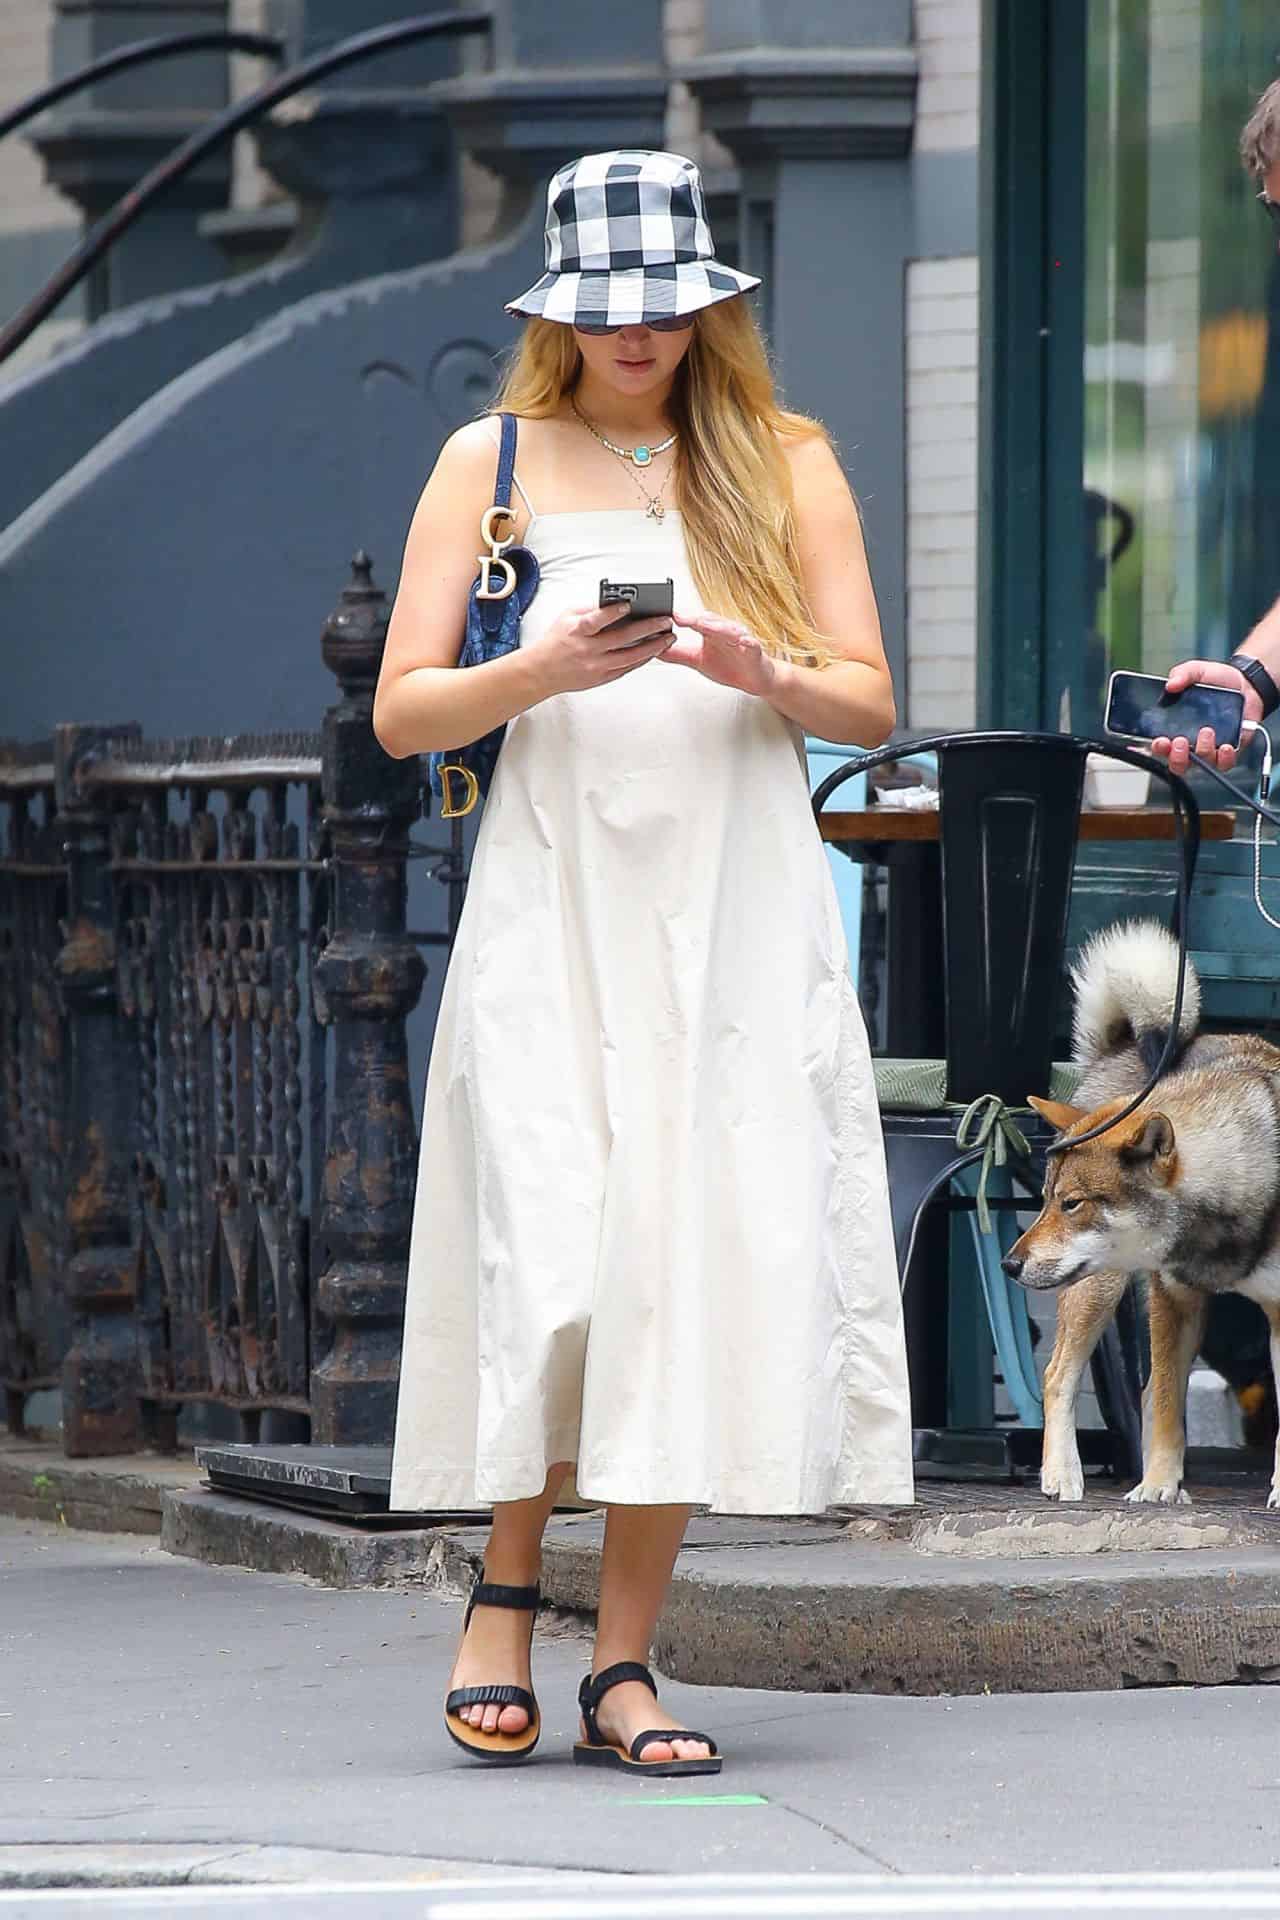 Jennifer Lawrence Wore a 6397 Cream Summer Dress in New York City